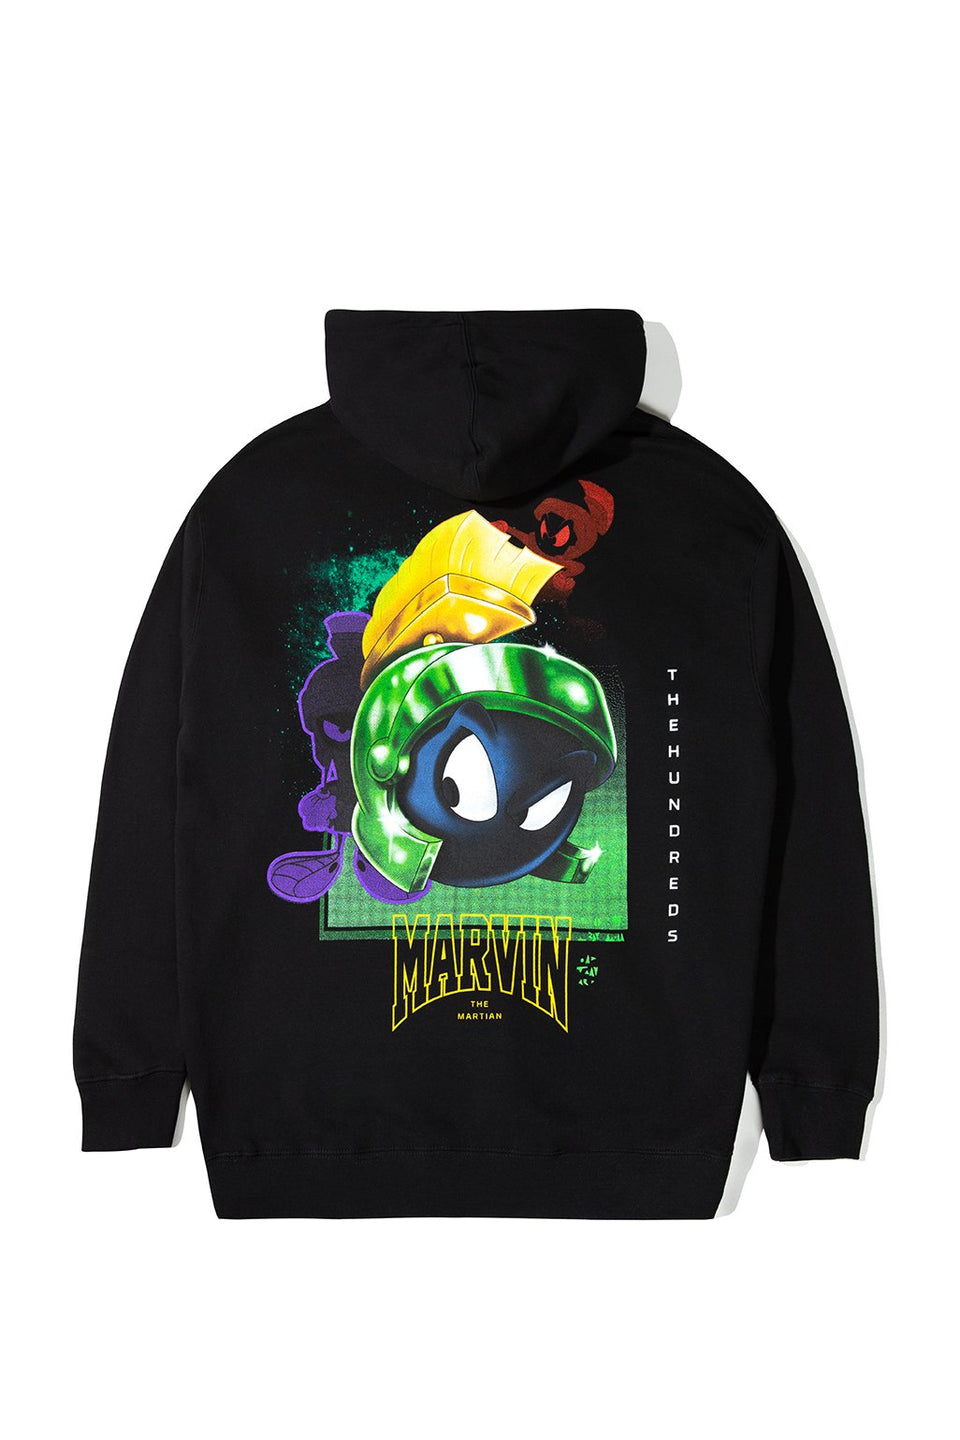 marvin the martian sweater